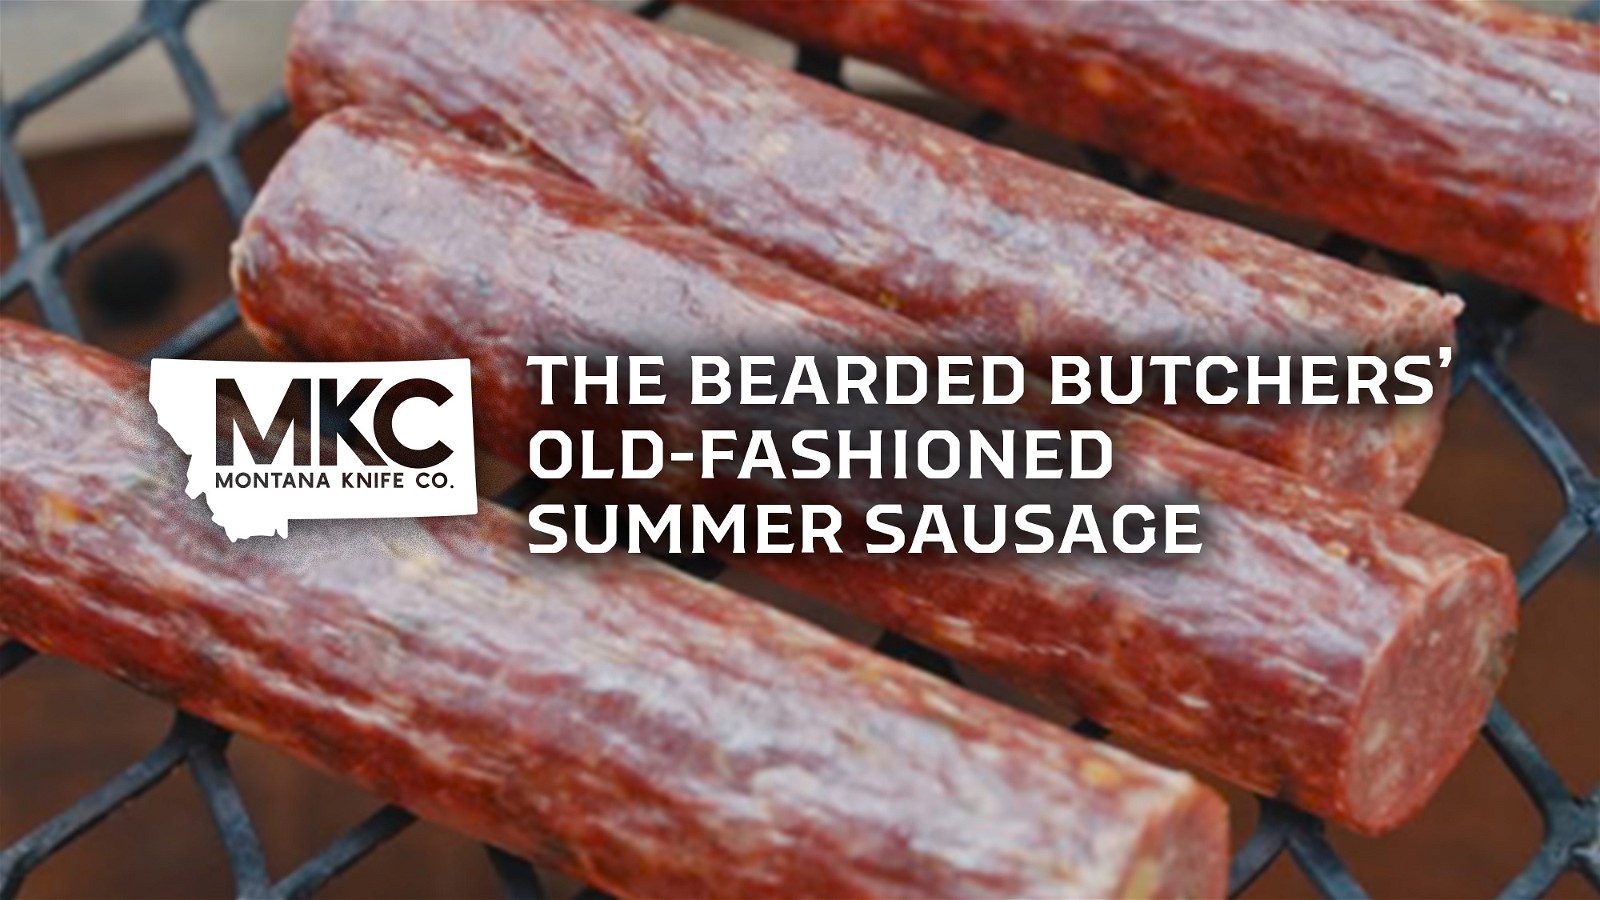 Image of The Bearded Butchers’ Old-Fashioned Summer Sausage